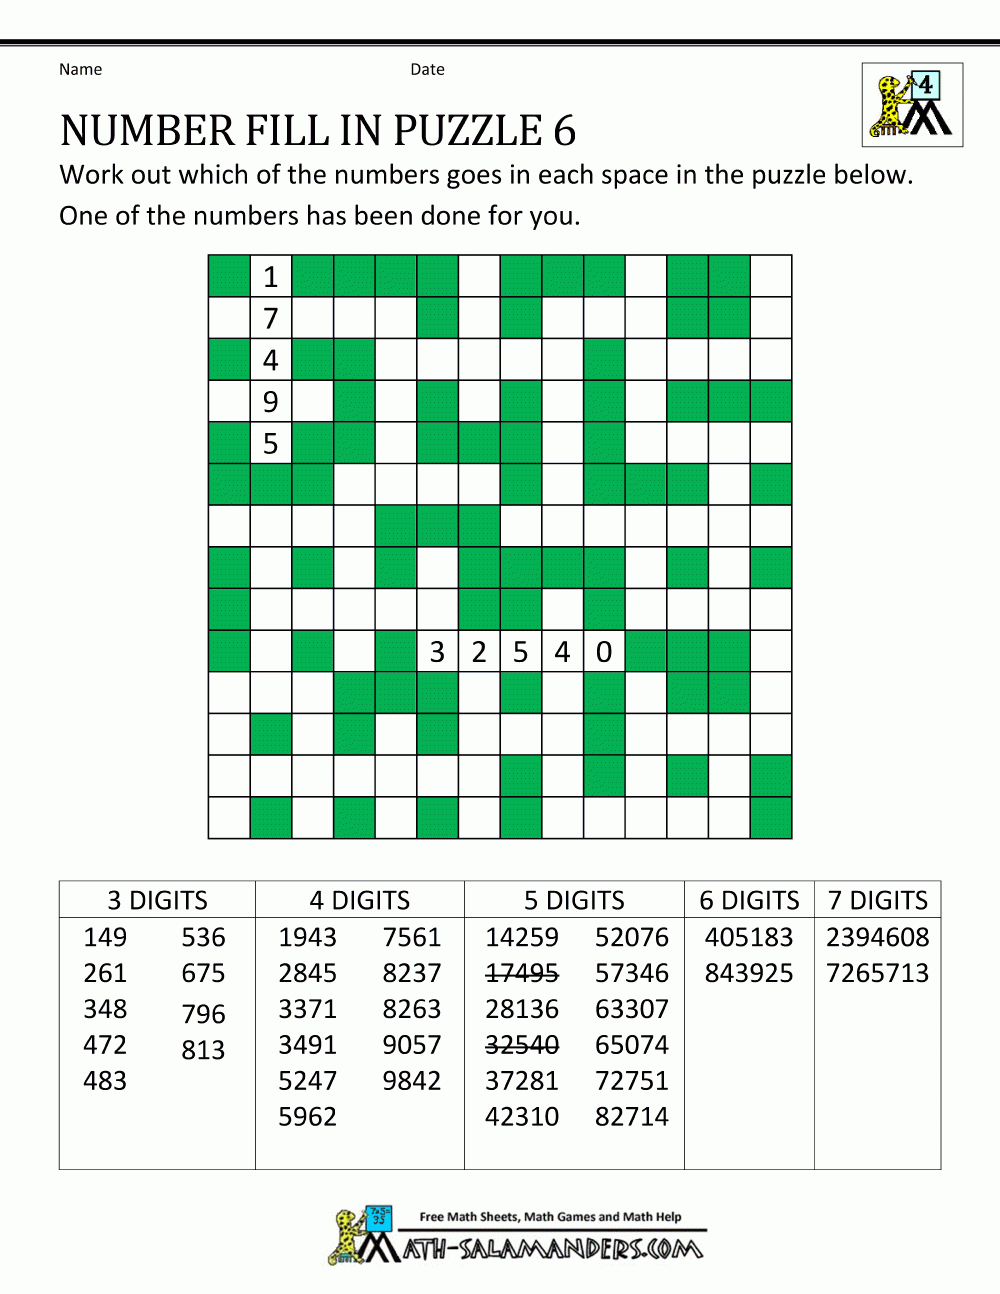 Number Fill In Puzzles - Free Printable Crossword Puzzle #6